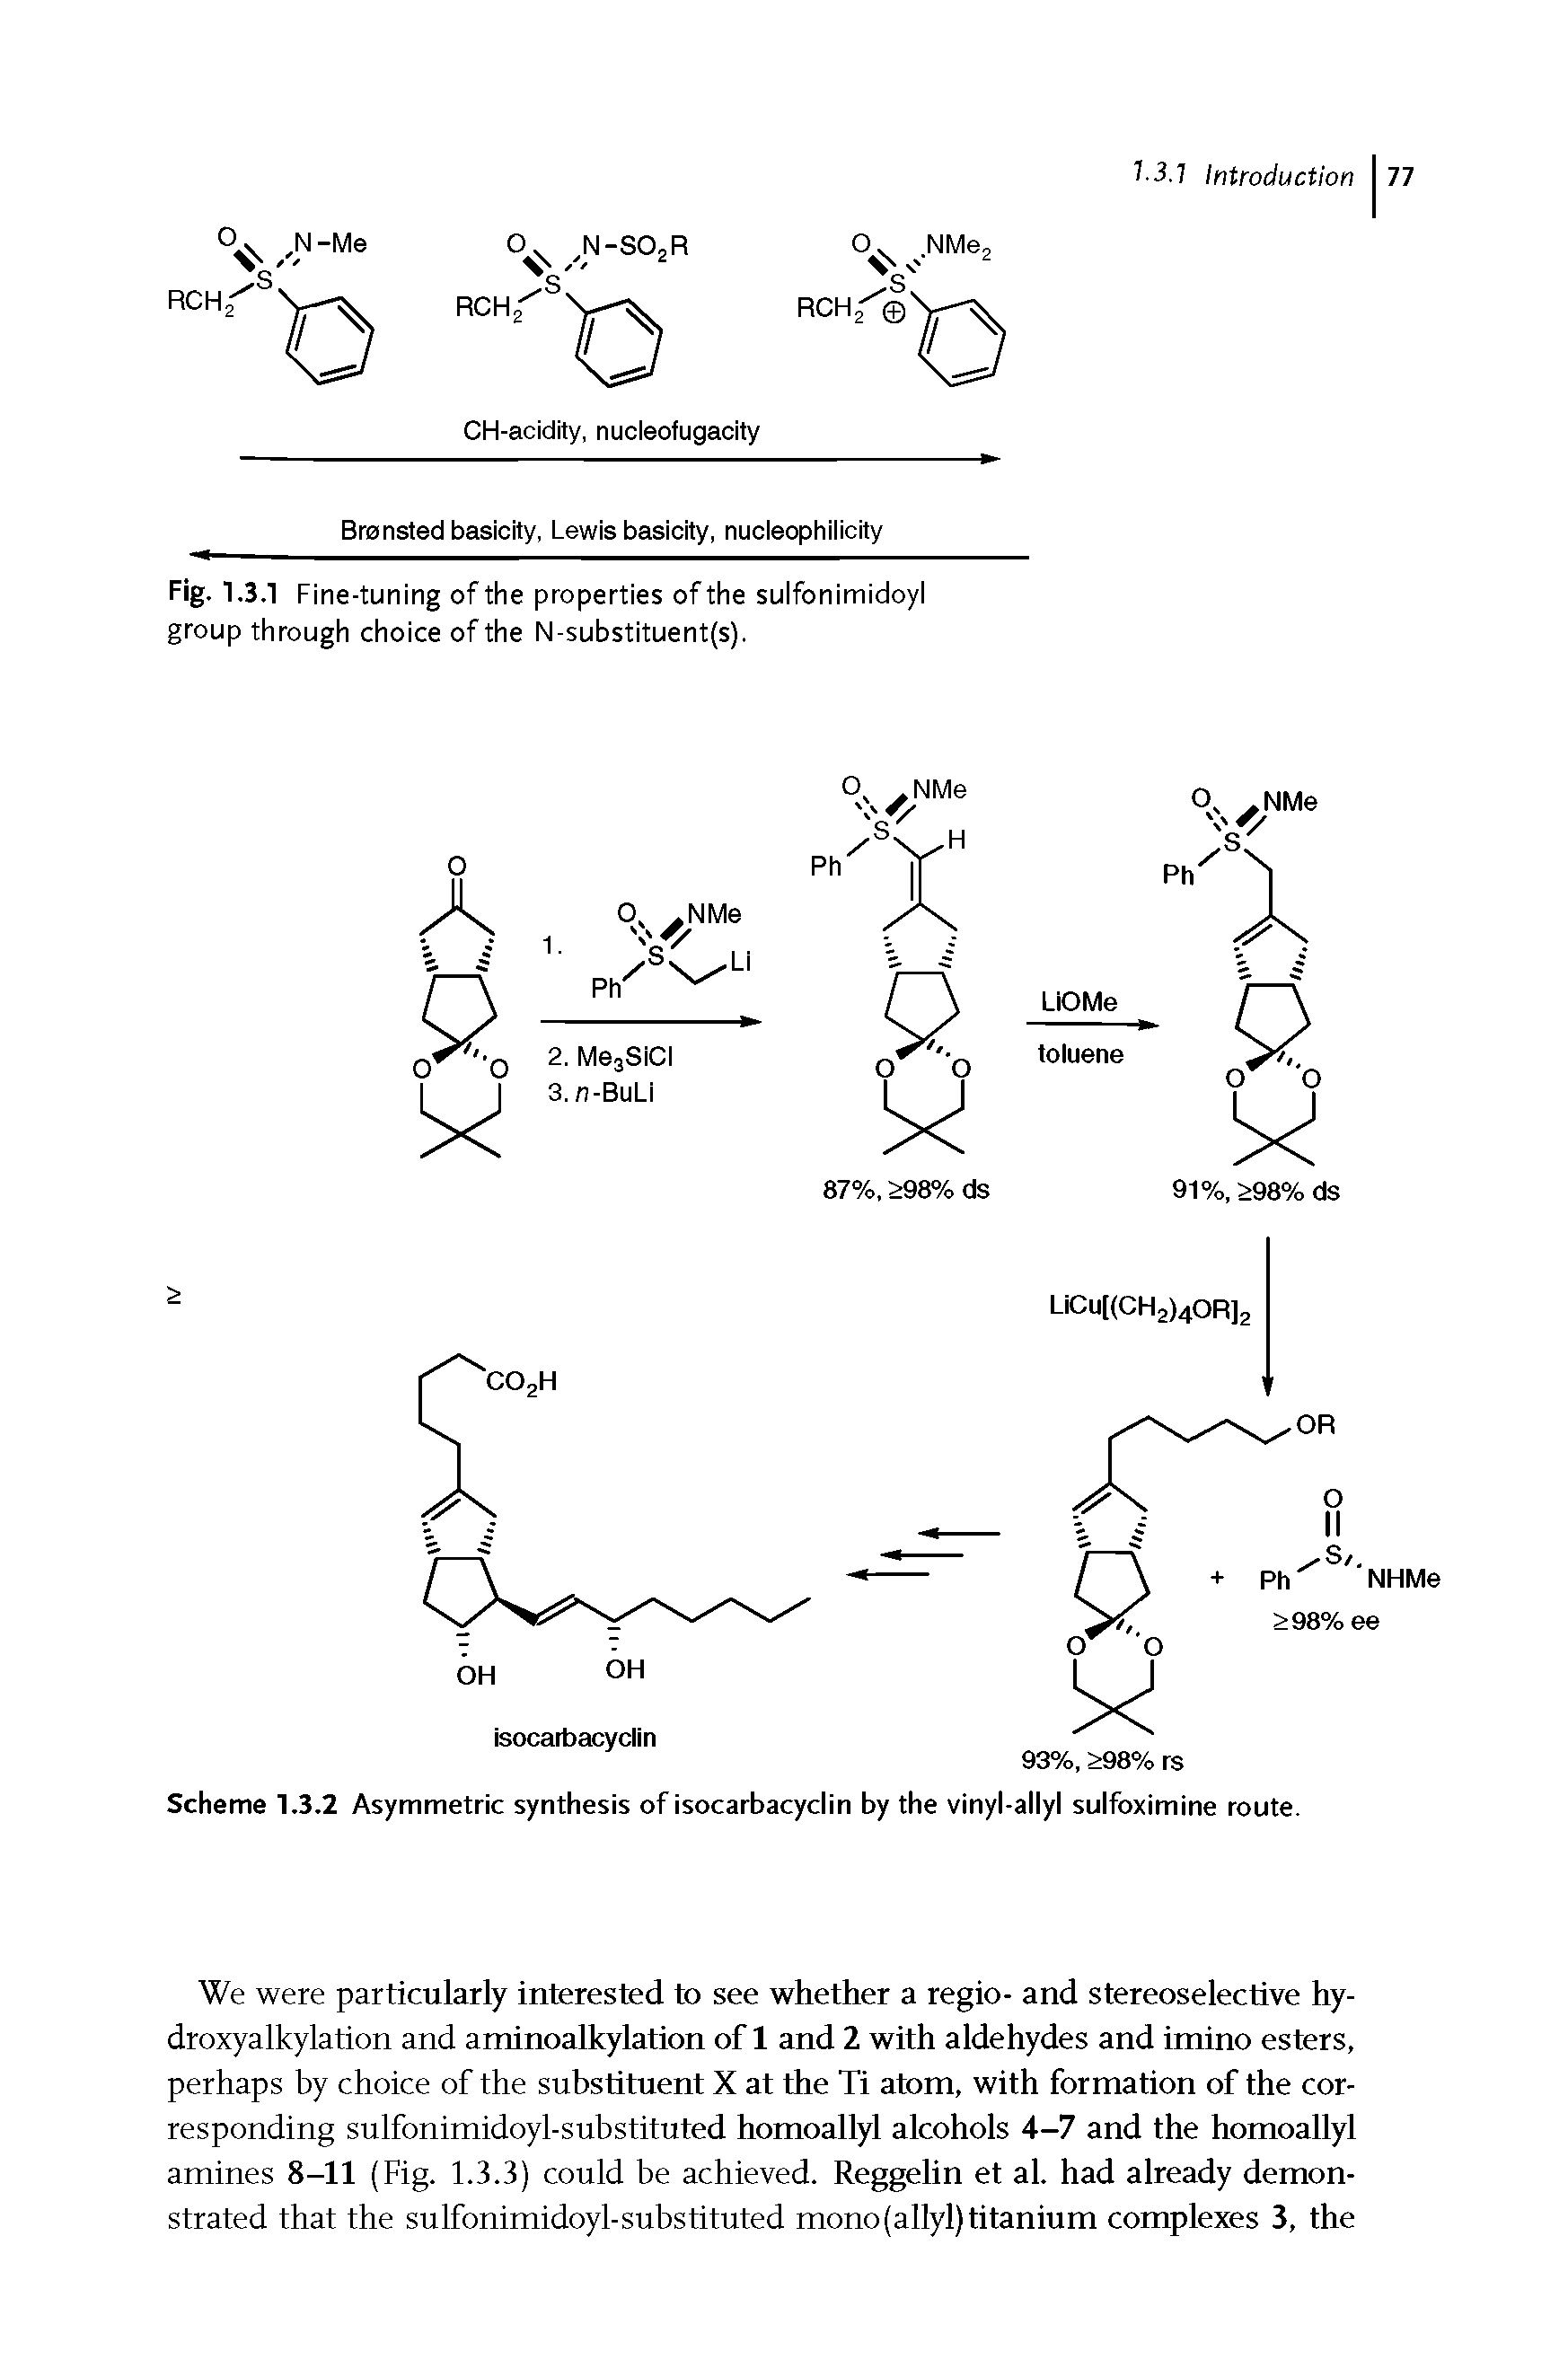 Scheme 1.3.2 Asymmetric synthesis of isocarbacyclin by the vinyl-allyl sulfoximine route.